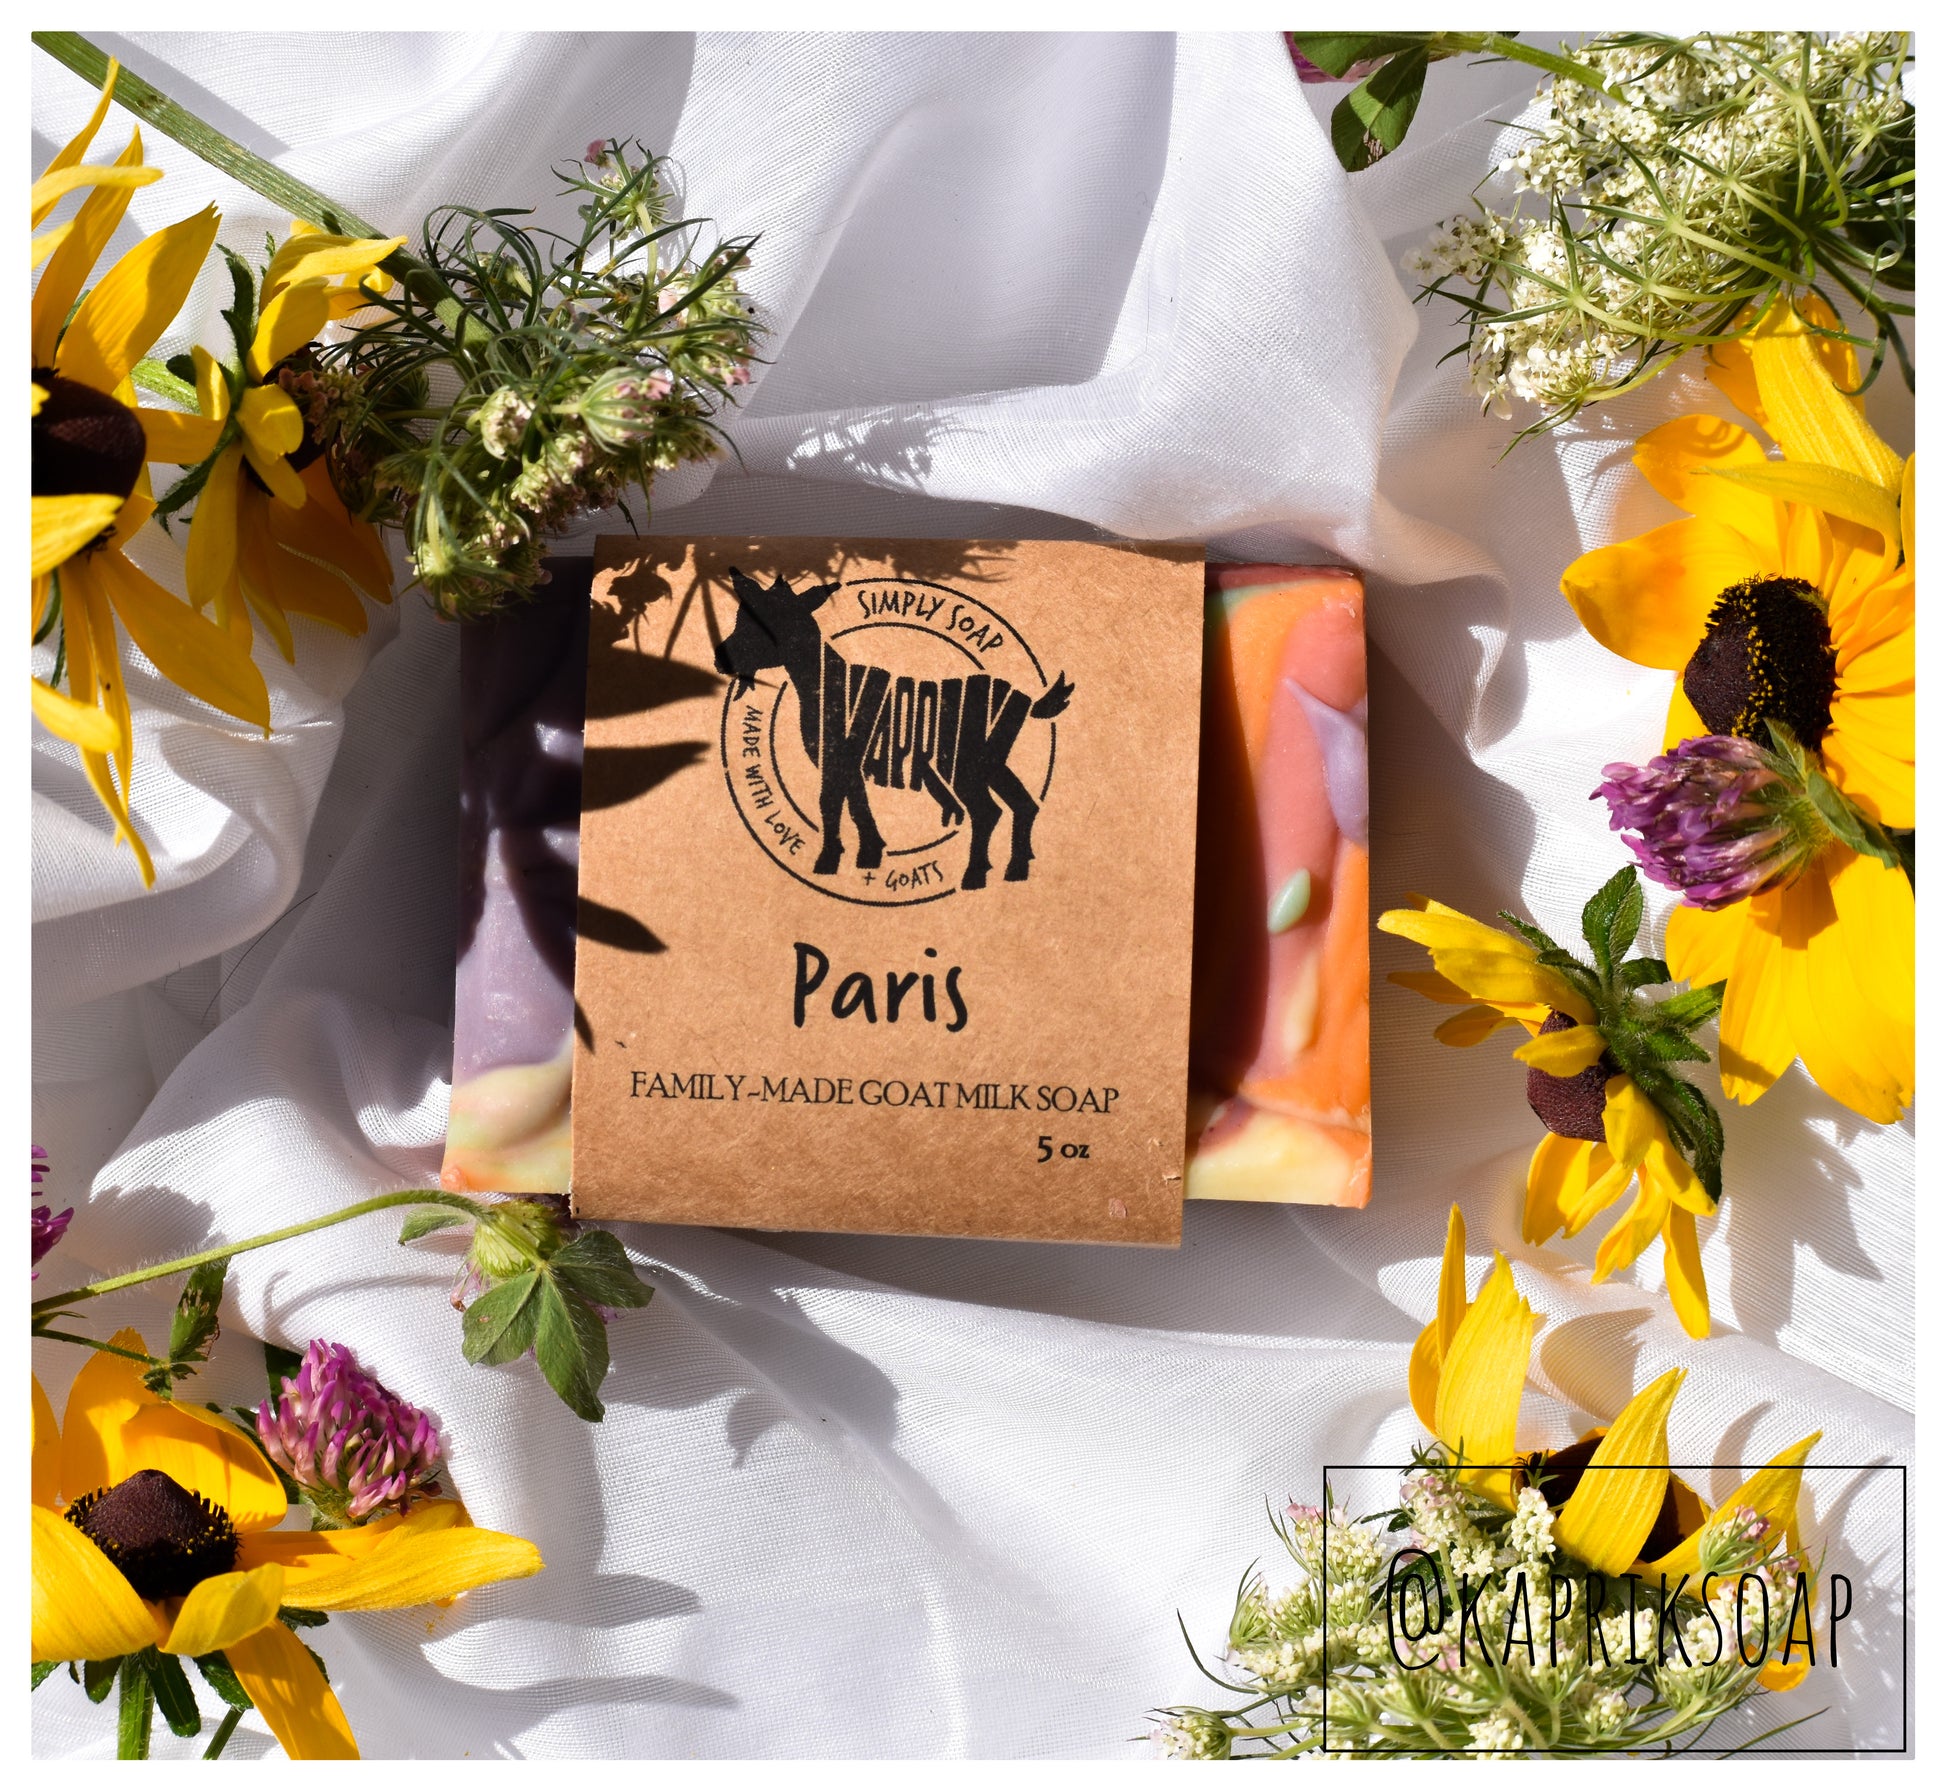 one bar of wrapped Paris cold process goat milk soap on white background with flowers